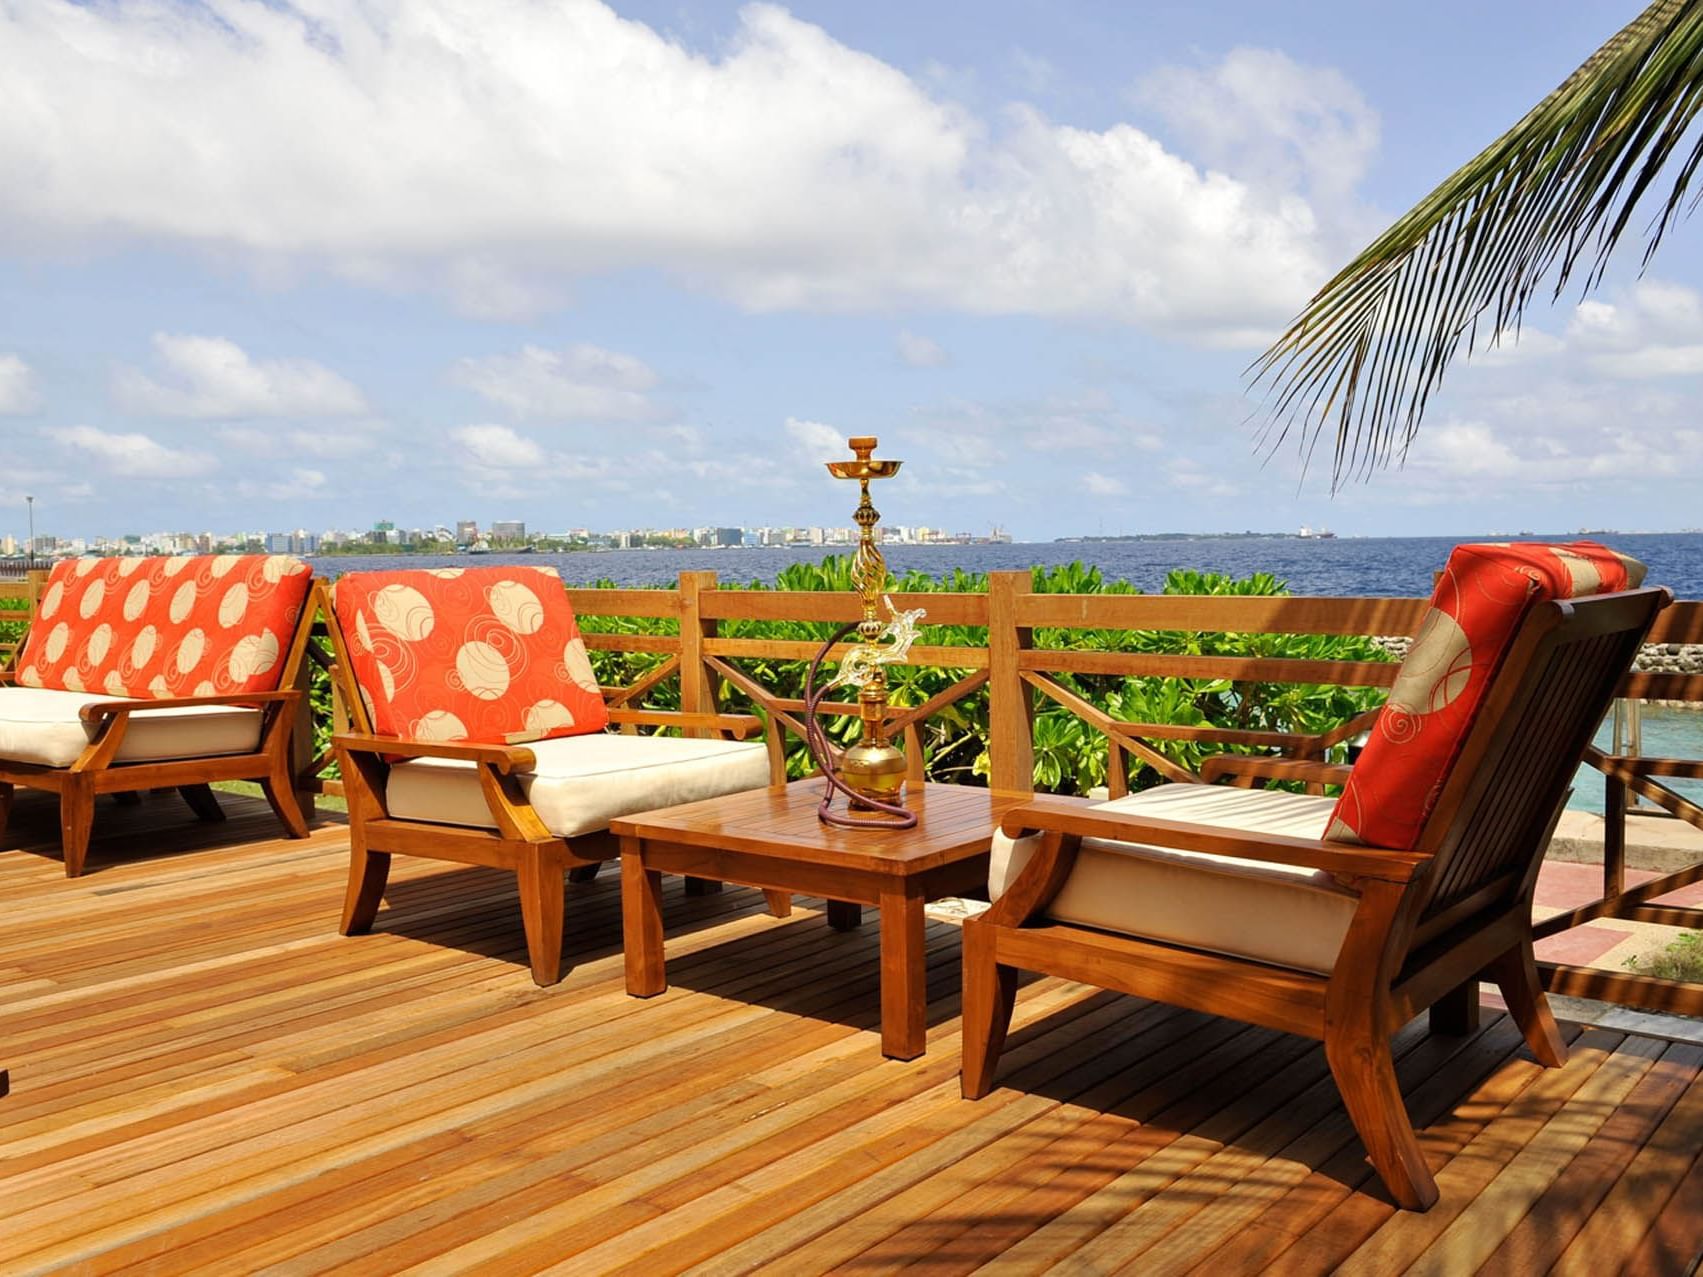 Champs Deck at Hulhule Island Hotel in Maldives